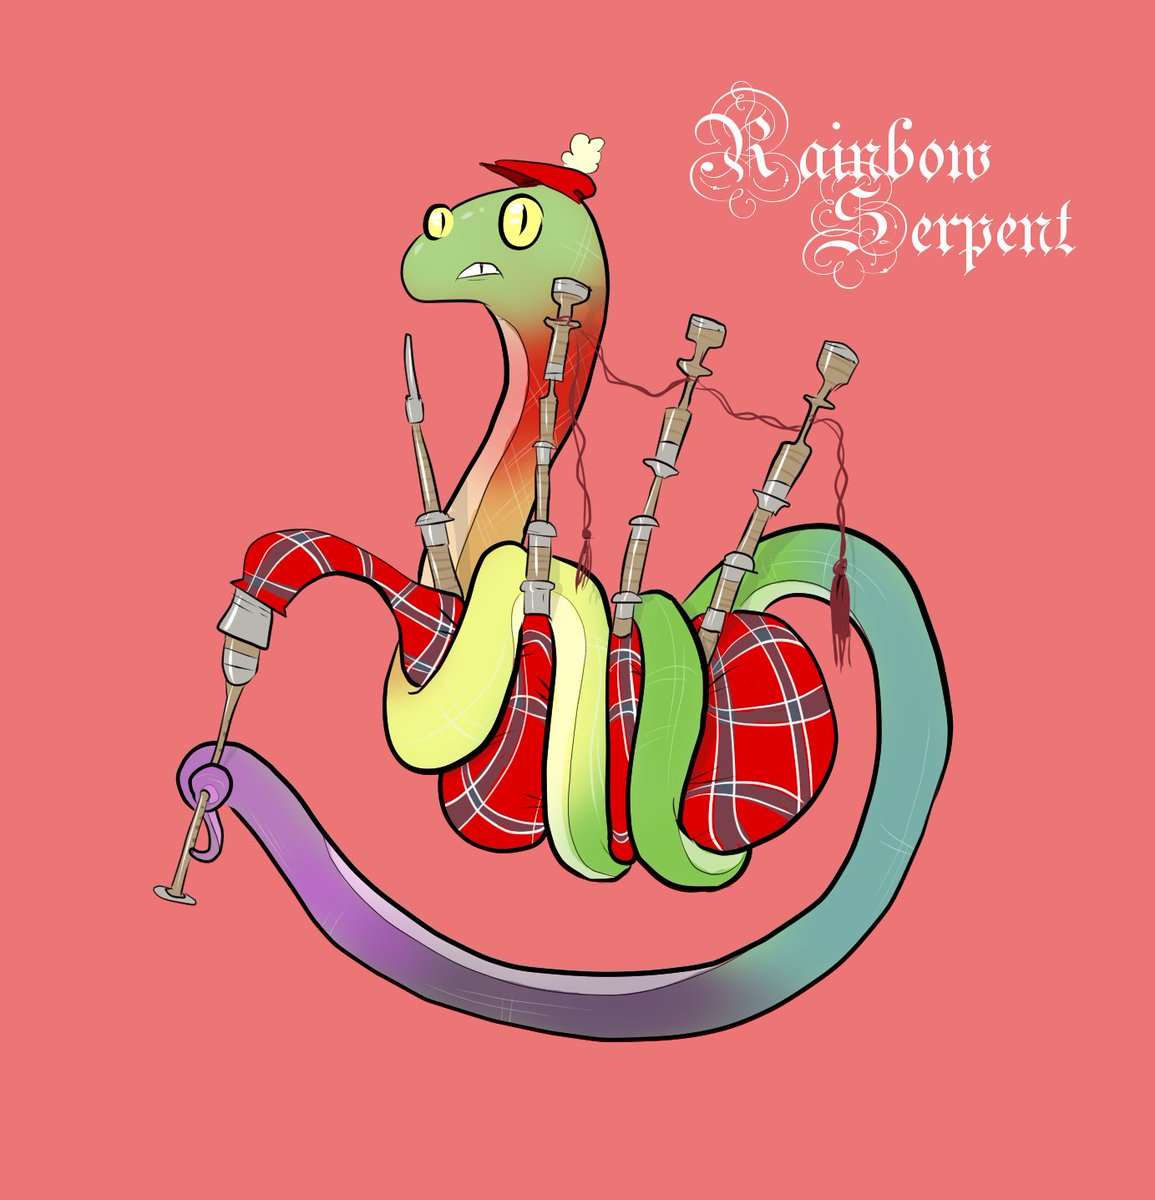 A #rainbowSerpent on the #bagpipe for #AnimalAlphabets. @AnimalAlphabets #MythicalCreatures #rainbow #illustration